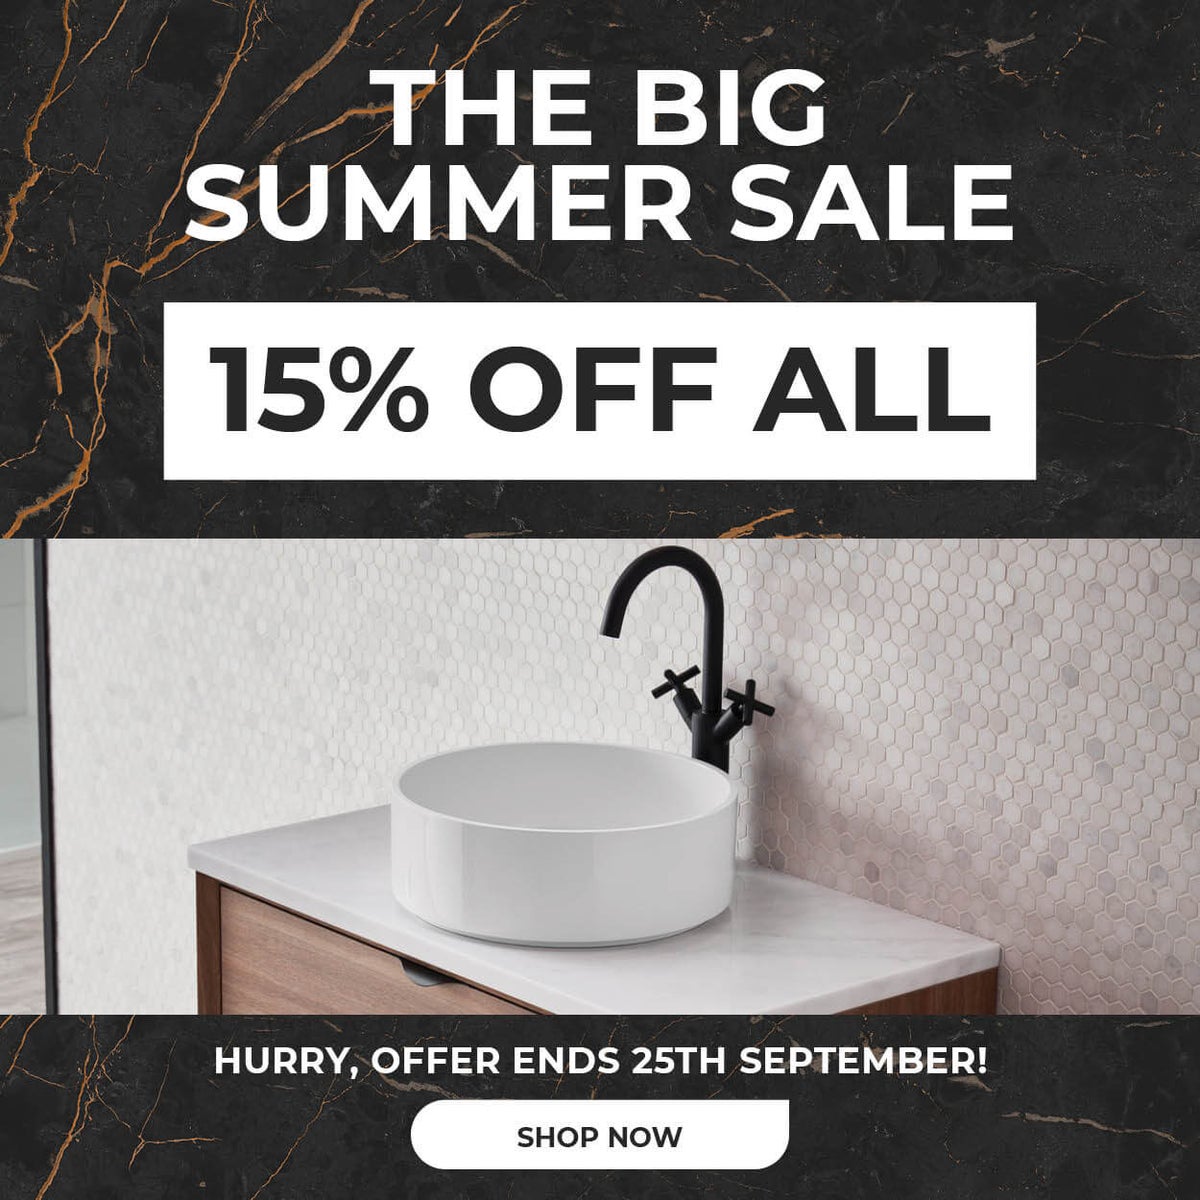 15% off all products until 25th September 2022